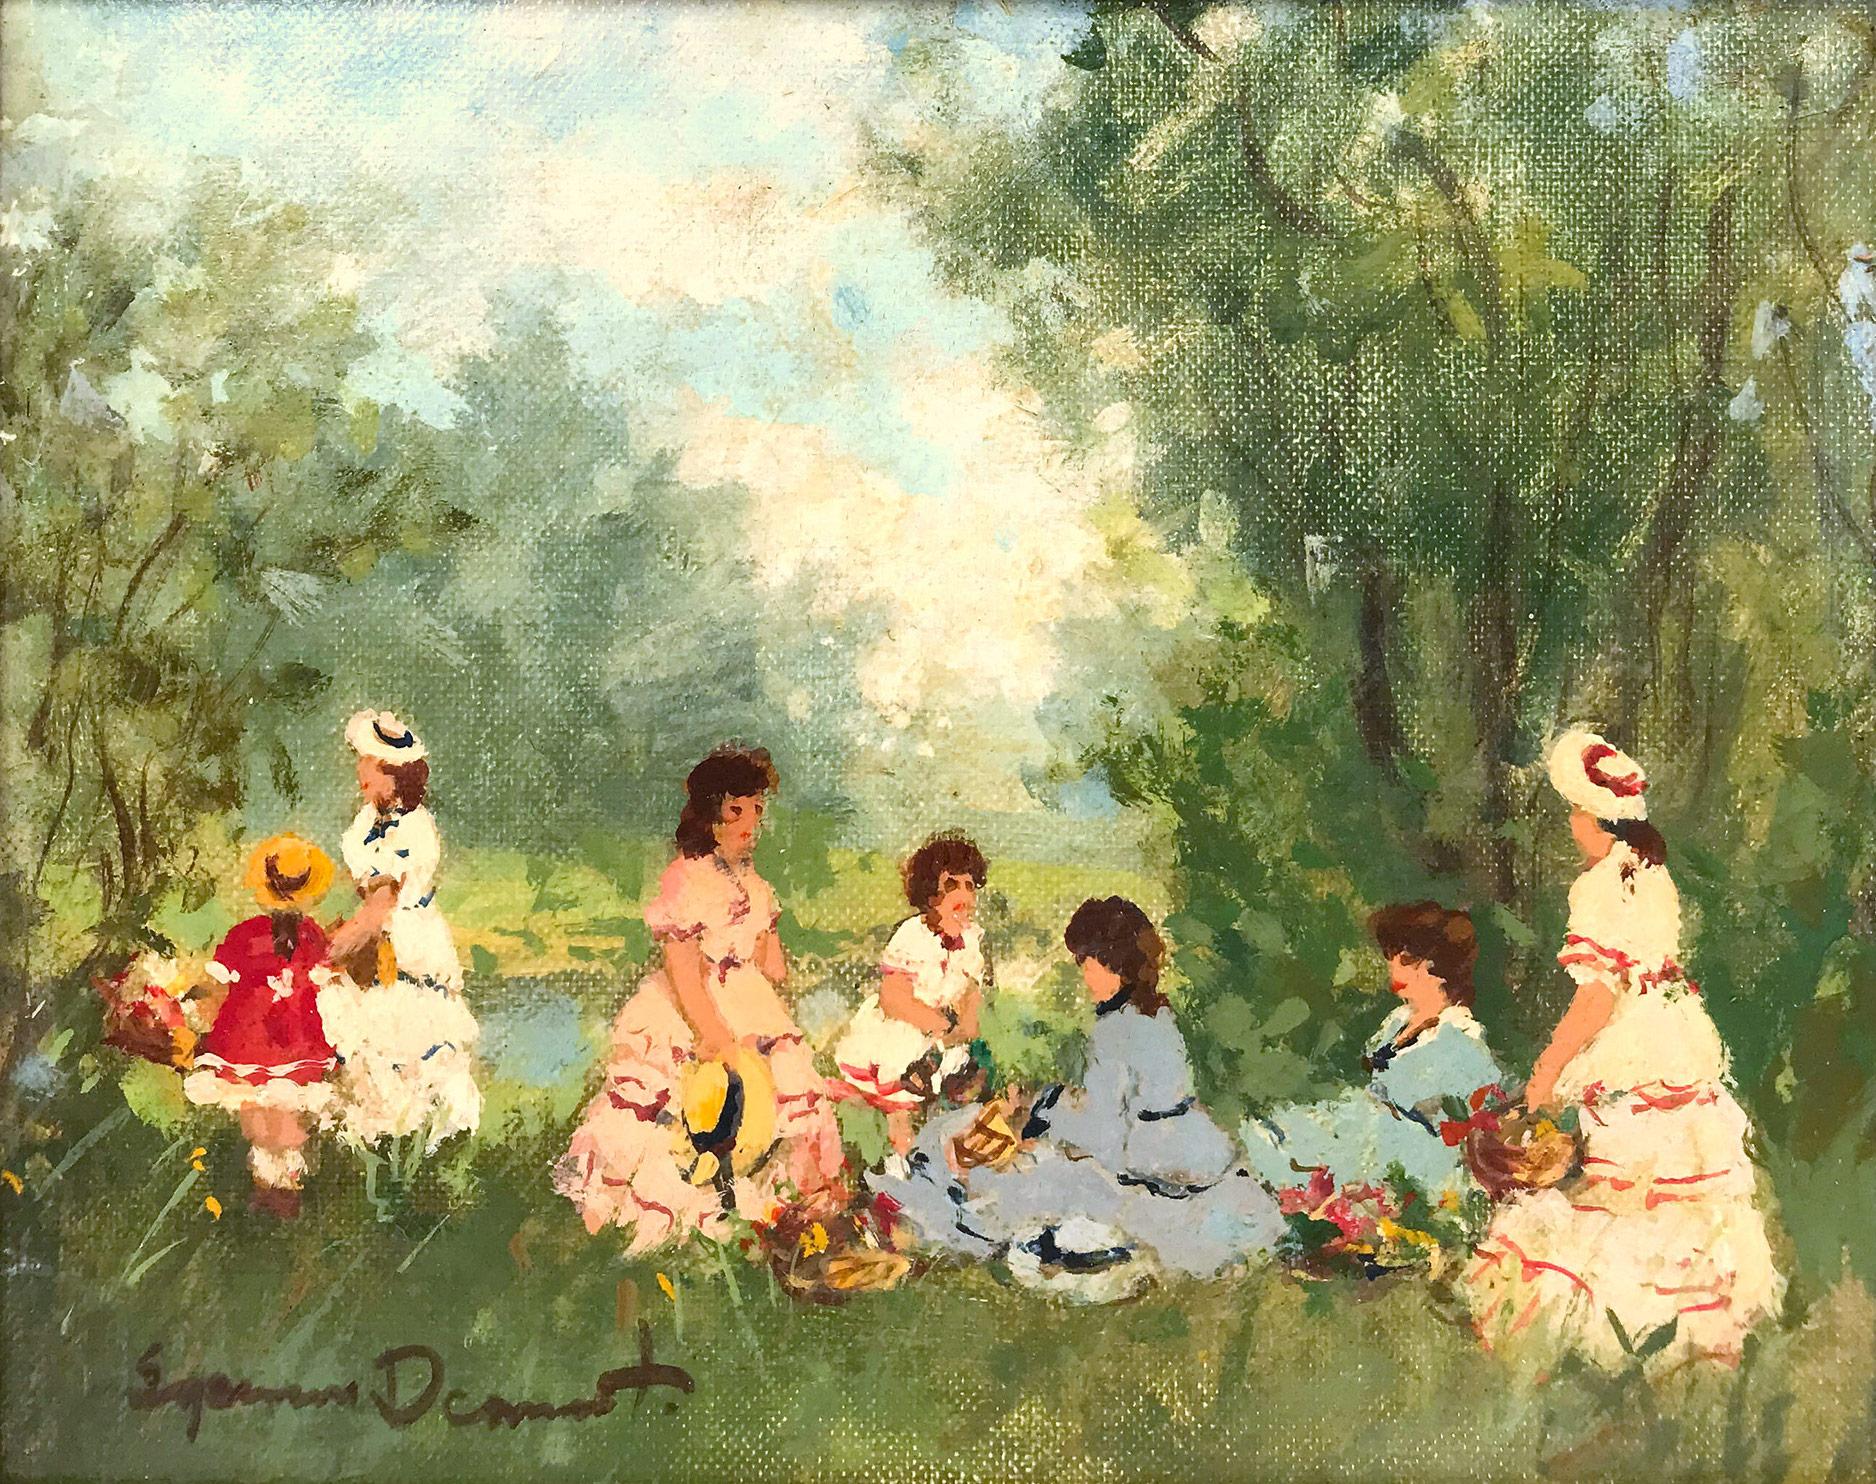 Picnic Scene in the Countryside - Painting by Suzanne Demarest 